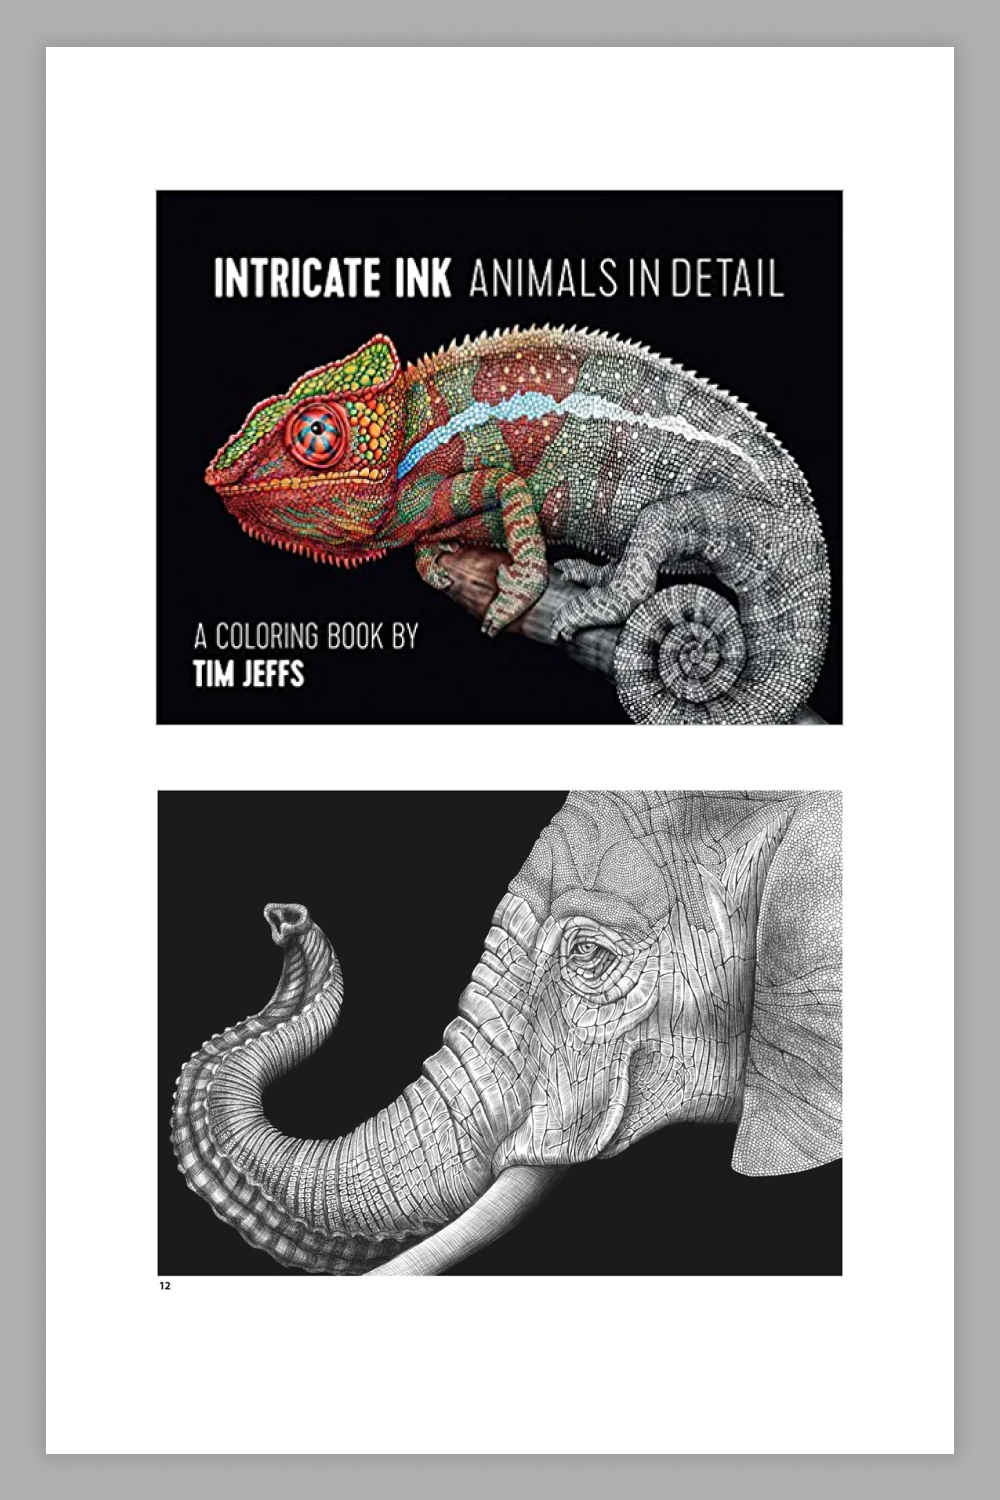 The book Intricate Ink: Animals in Detail.